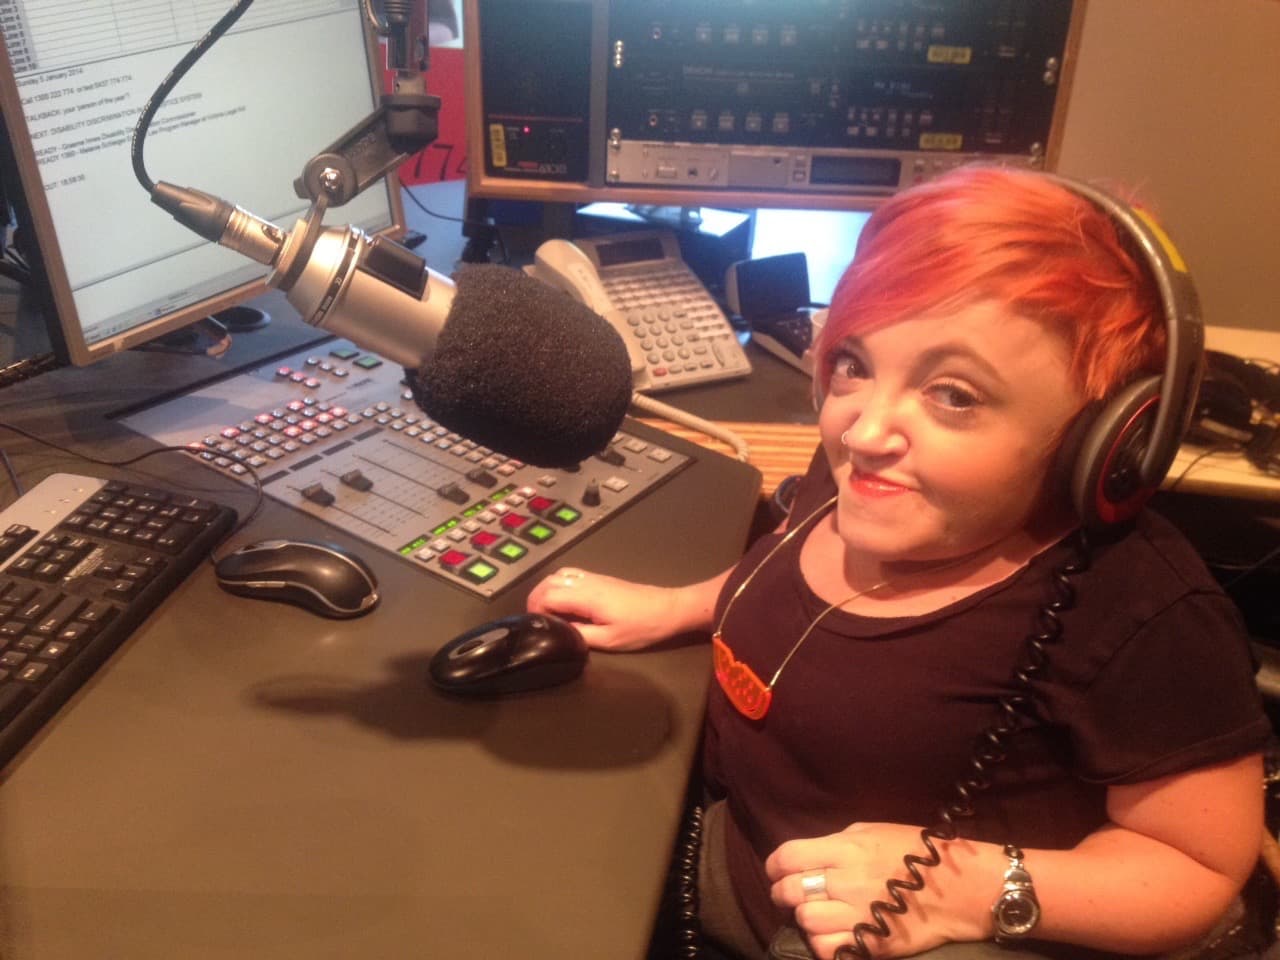 Stella is in a radio studio with a large microphone in front of her. She's behind the control panel and wearing headphones.